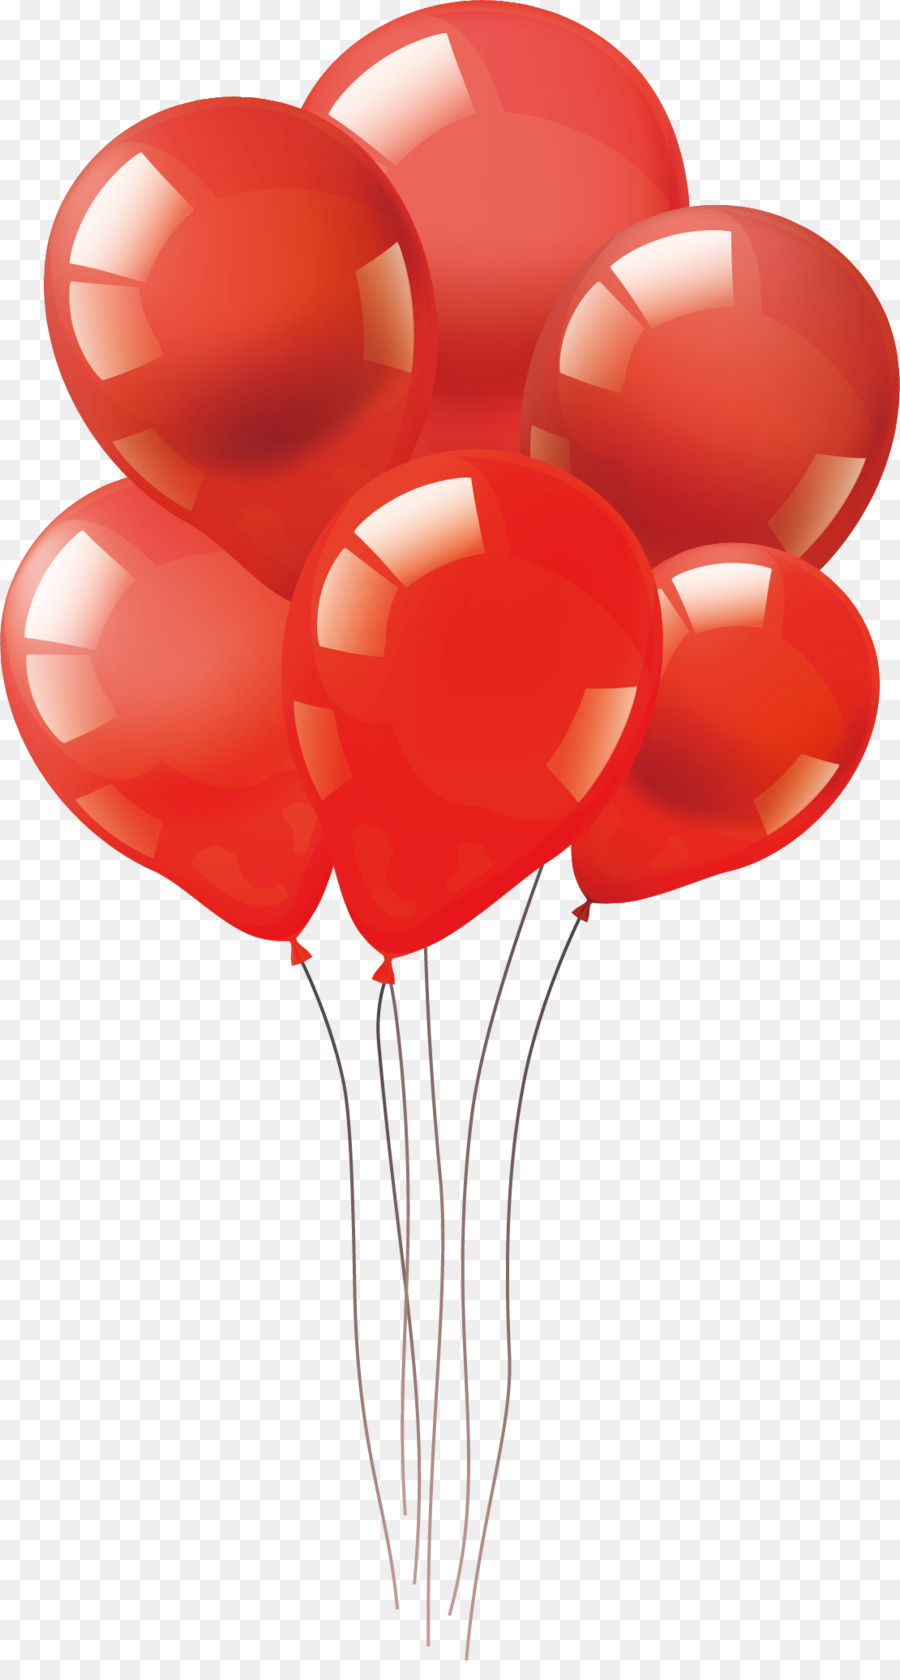 Balloon - Vector hand-painted red balloon png download - 1110*2049 - Free Transparent Balloon png Download.